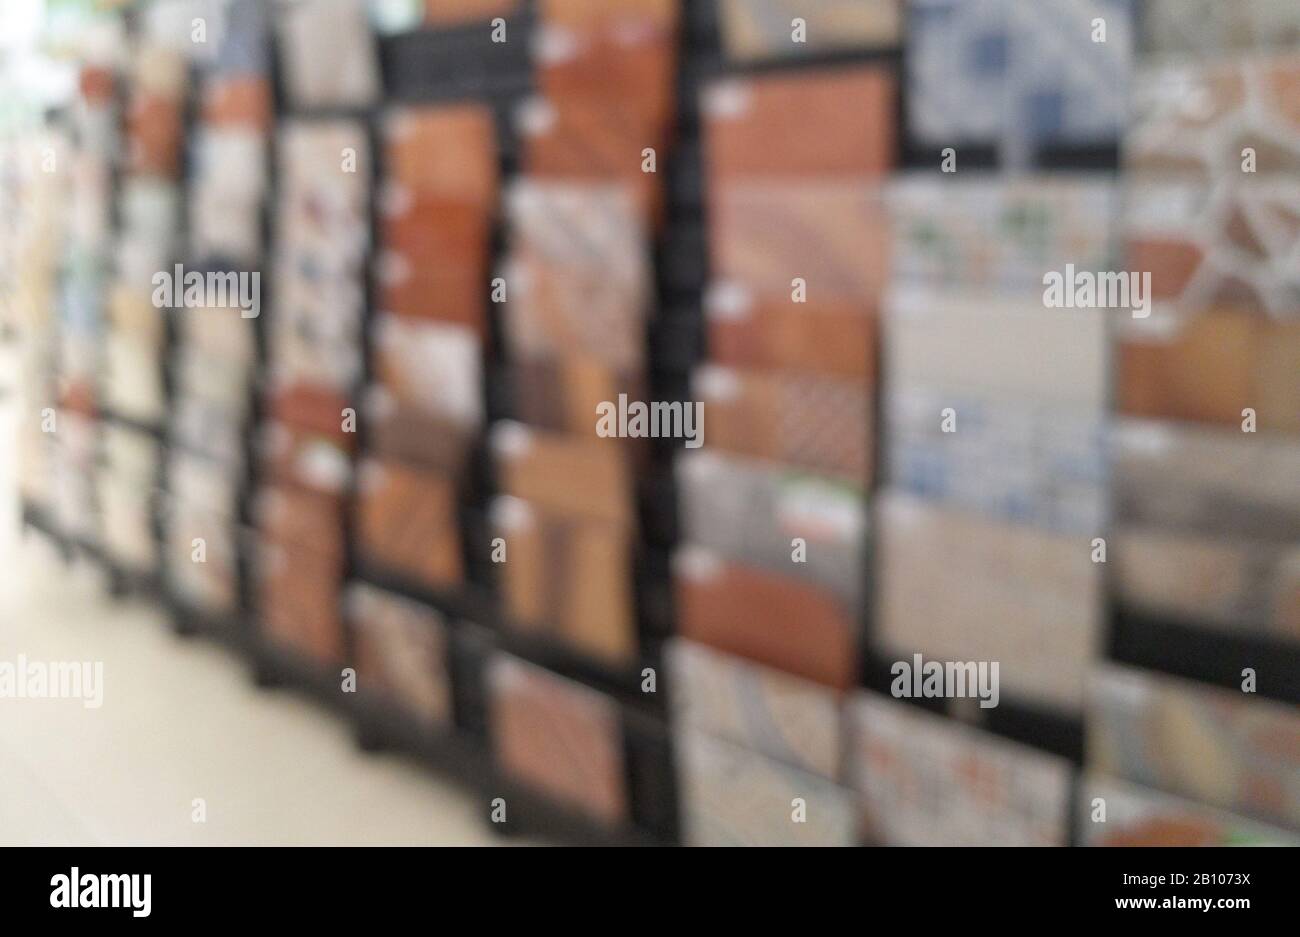 Shelf with tiles in hardware store blurred background Stock Photo